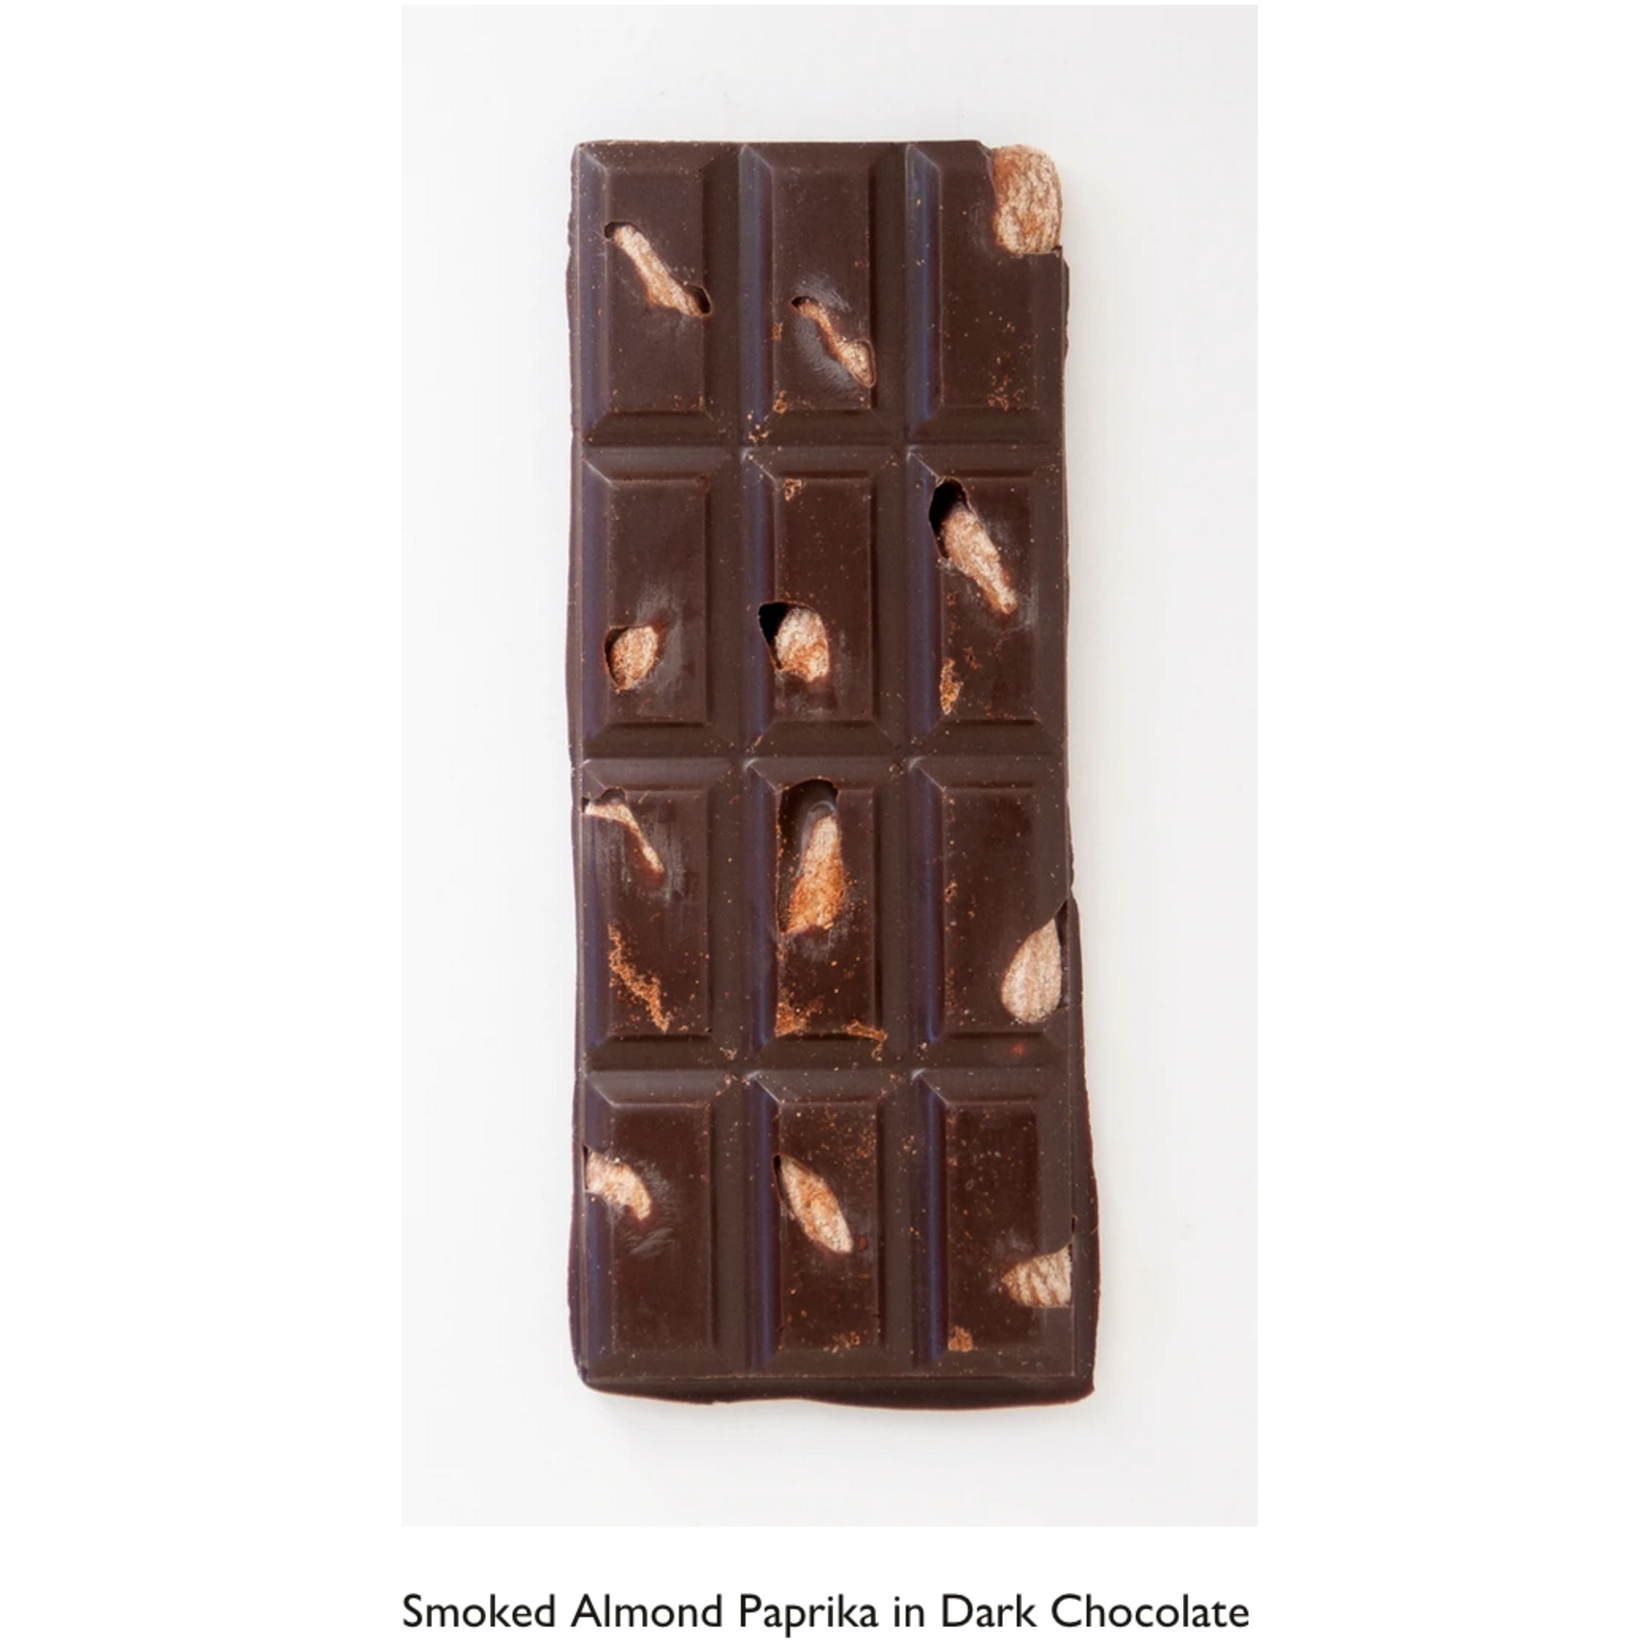 The Best Chocolate in Town (POC) Assorted Dark Chocolate Bars